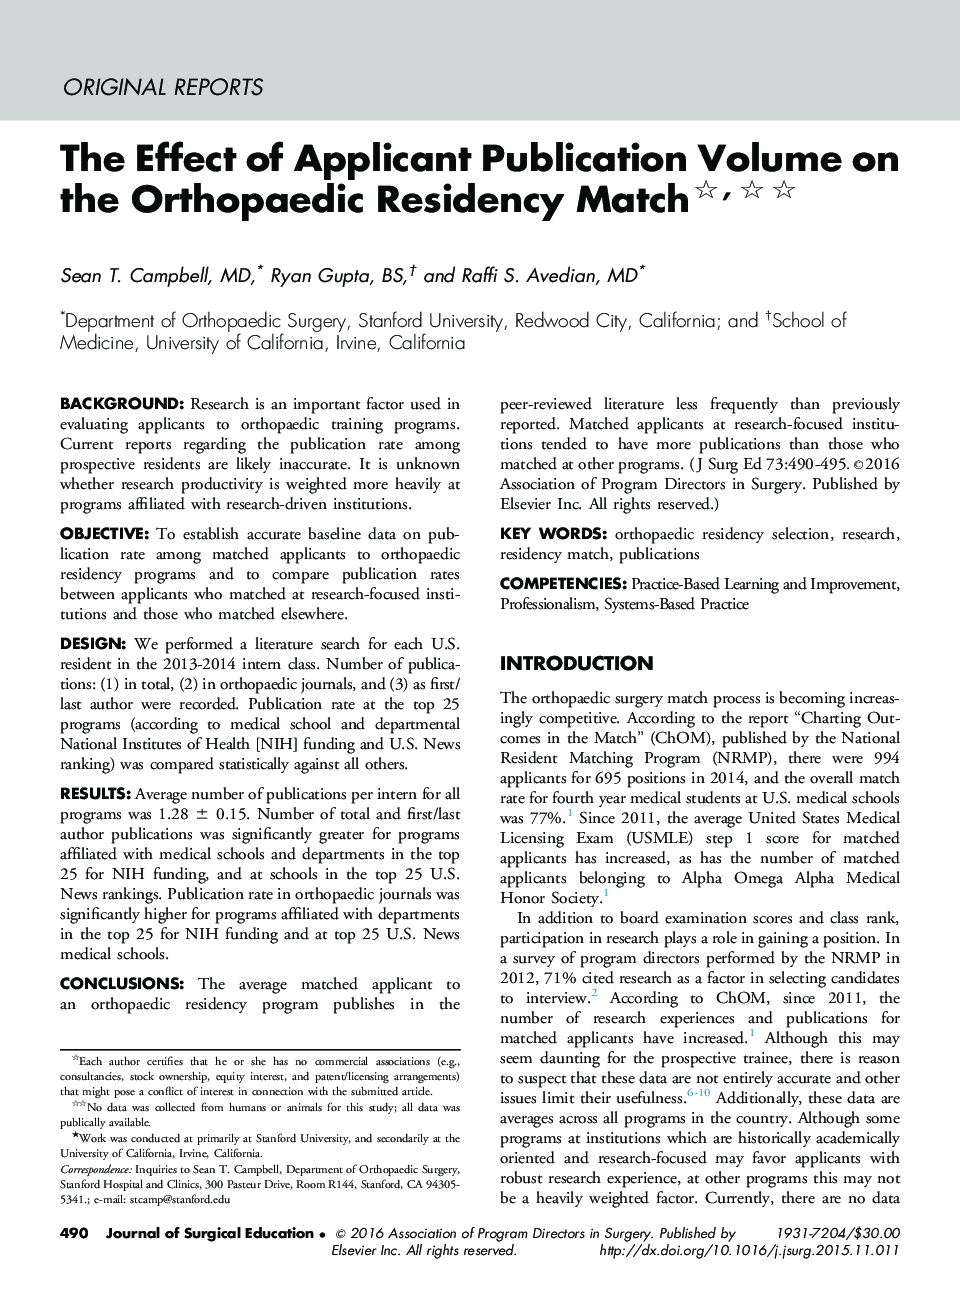 The Effect of Applicant Publication Volume on the Orthopaedic Residency Match